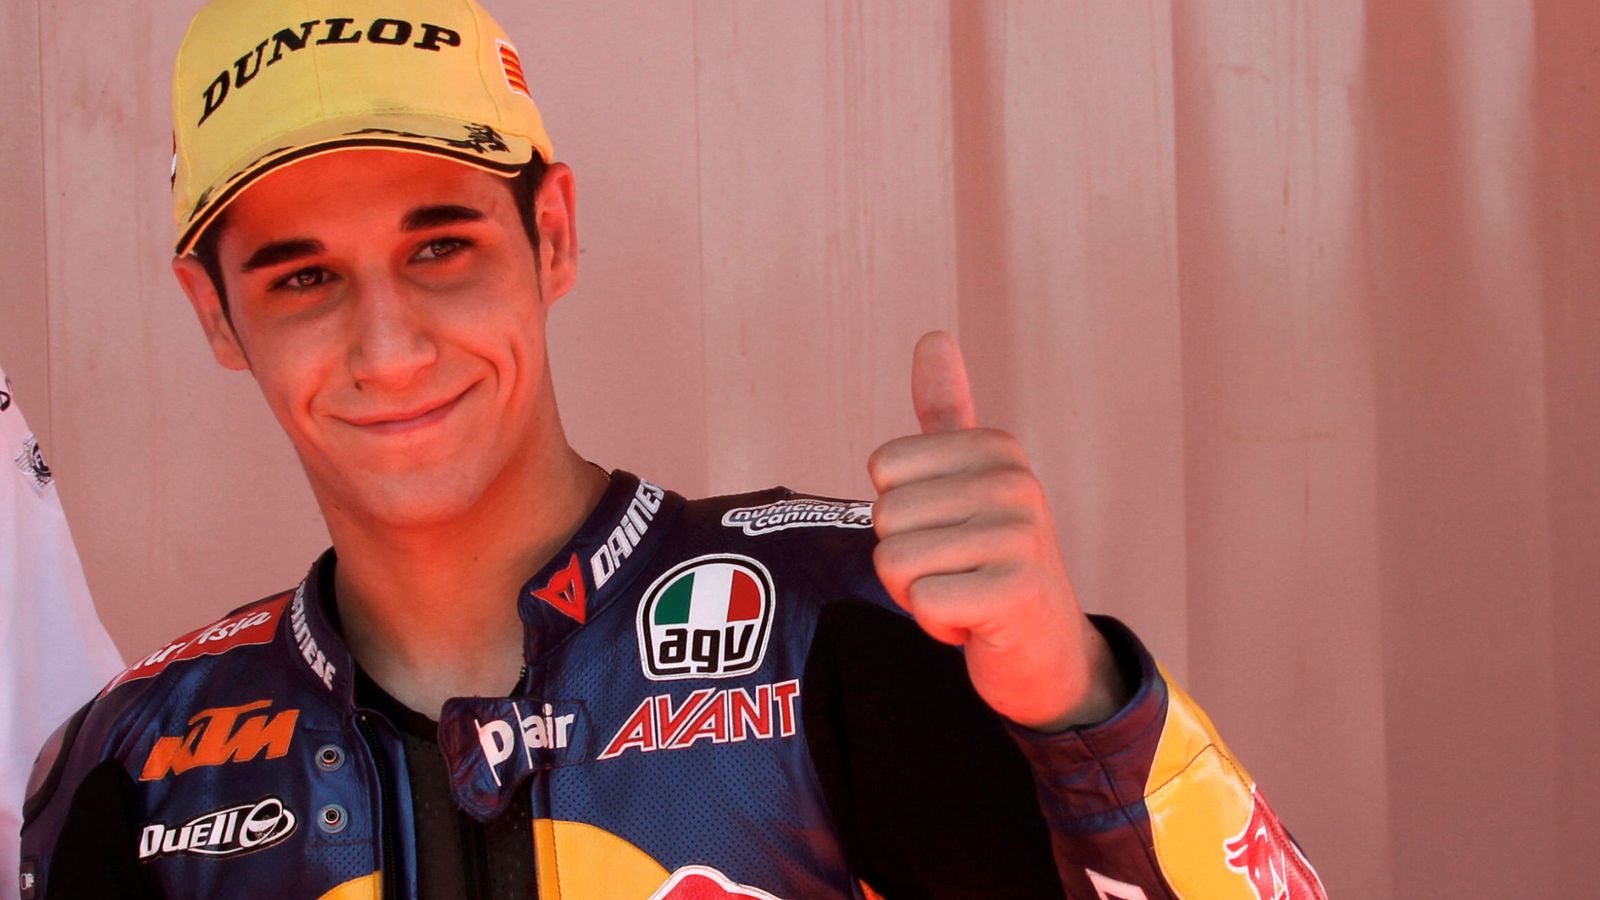 Foto: Ktm moto3 rider salom shows the thumb up to photographers after taking pole position during the qualifying of the catalunya grand prix in montmelo circuit near barcelona